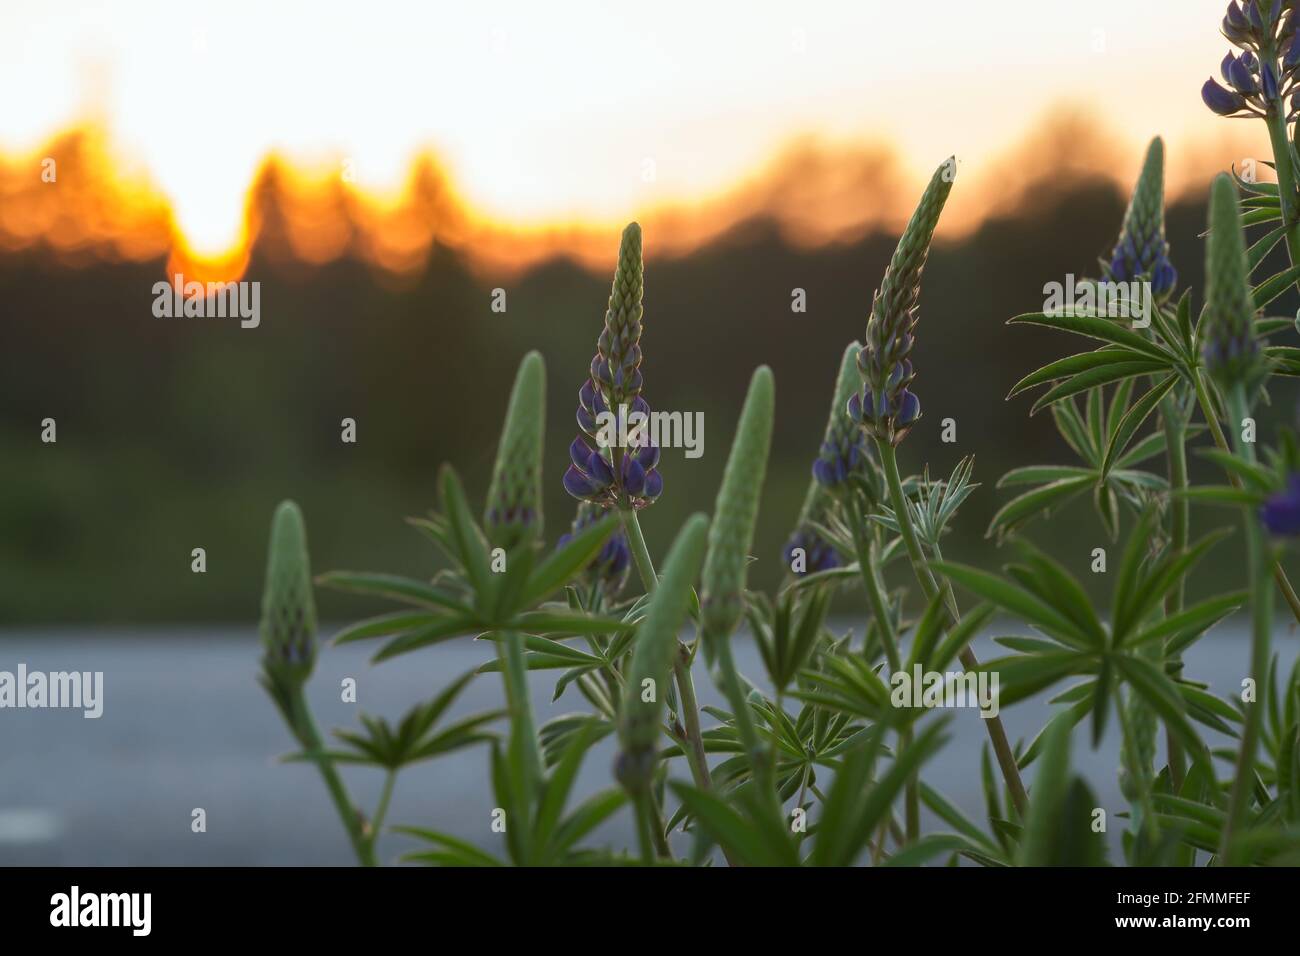 Mosquito resting on lupin plant, reflections in the background Stock Photo